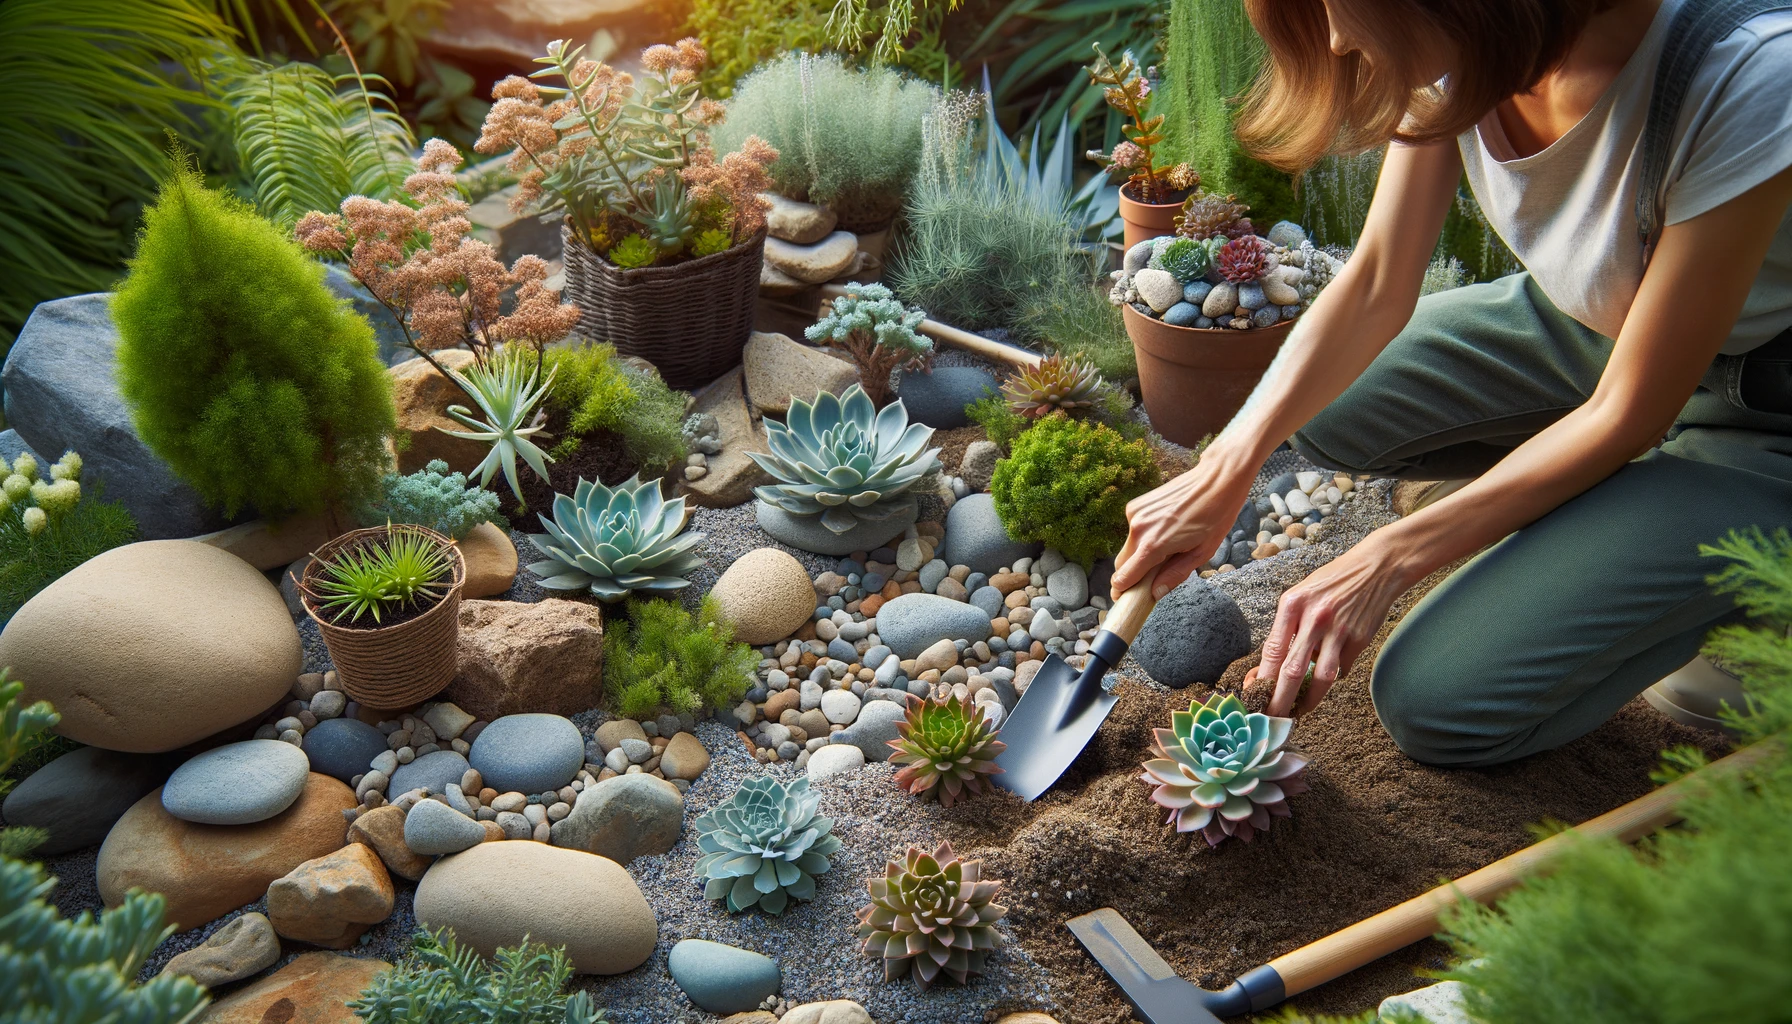 A woman outdoors, arranging rocks and planting in a rock garden